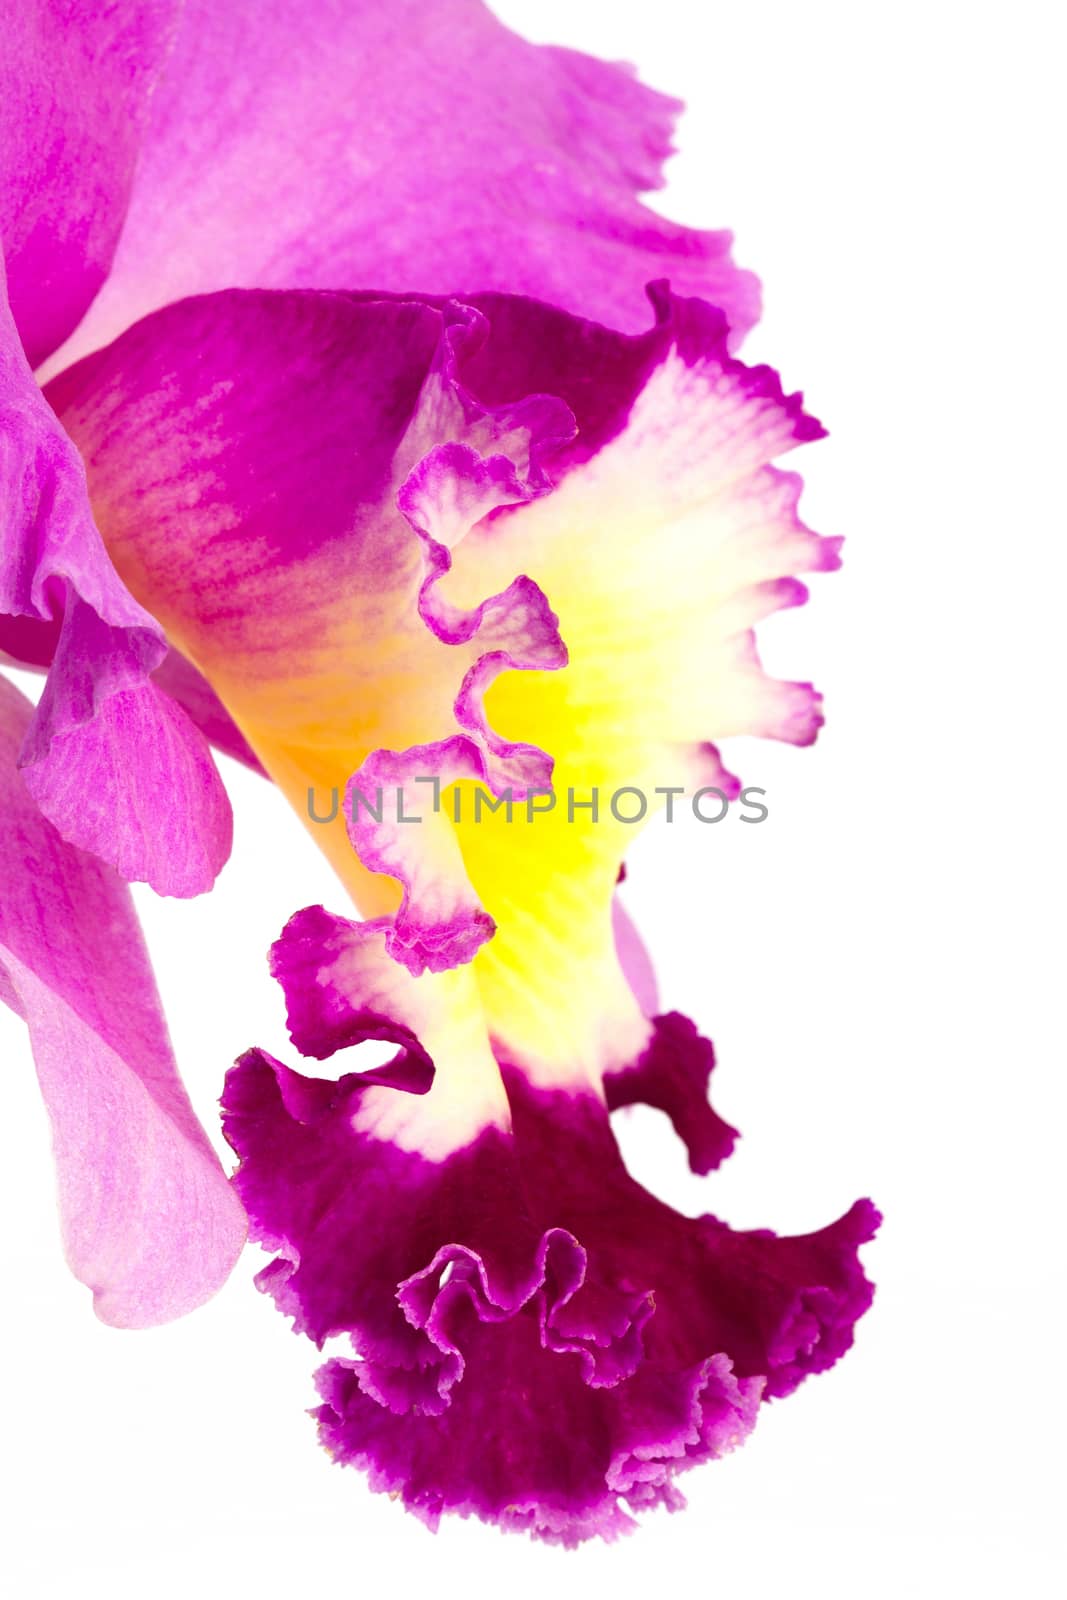 A close-up view of the inside of a colorful cattleya orchid